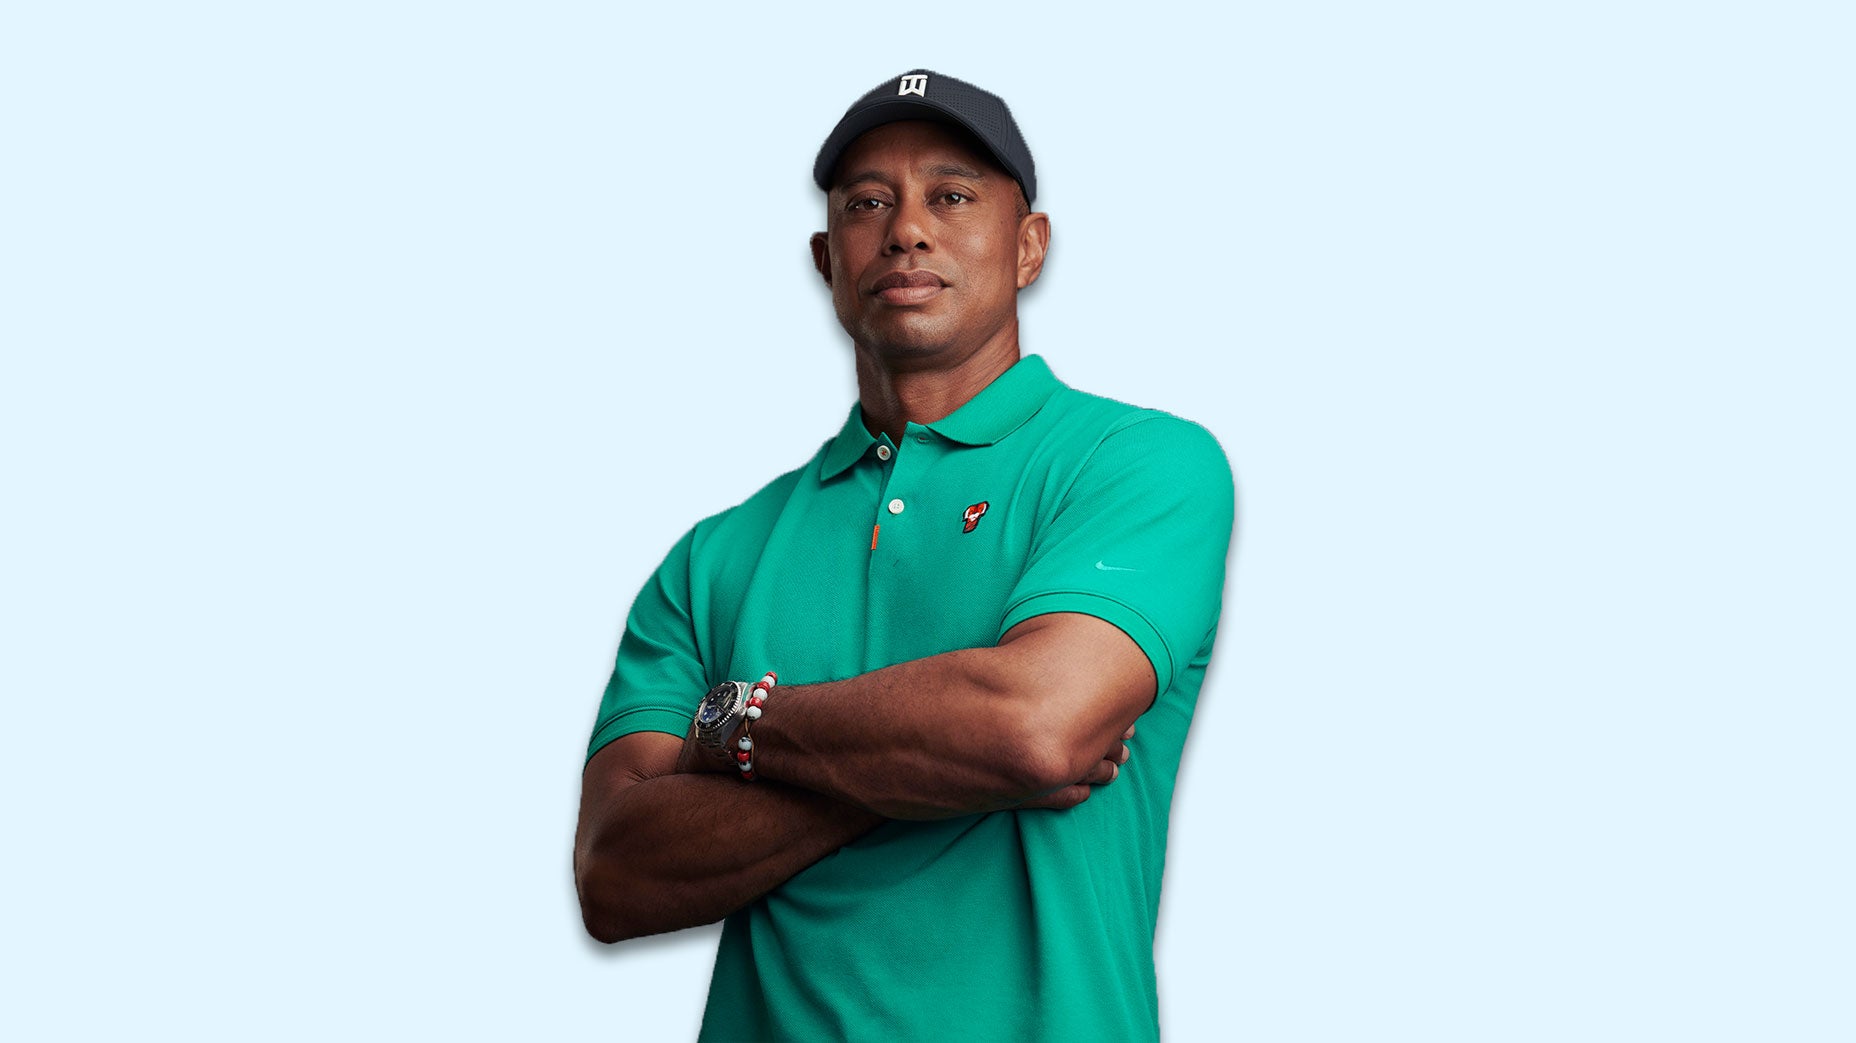 The Tiger Woods shirts that flew off 